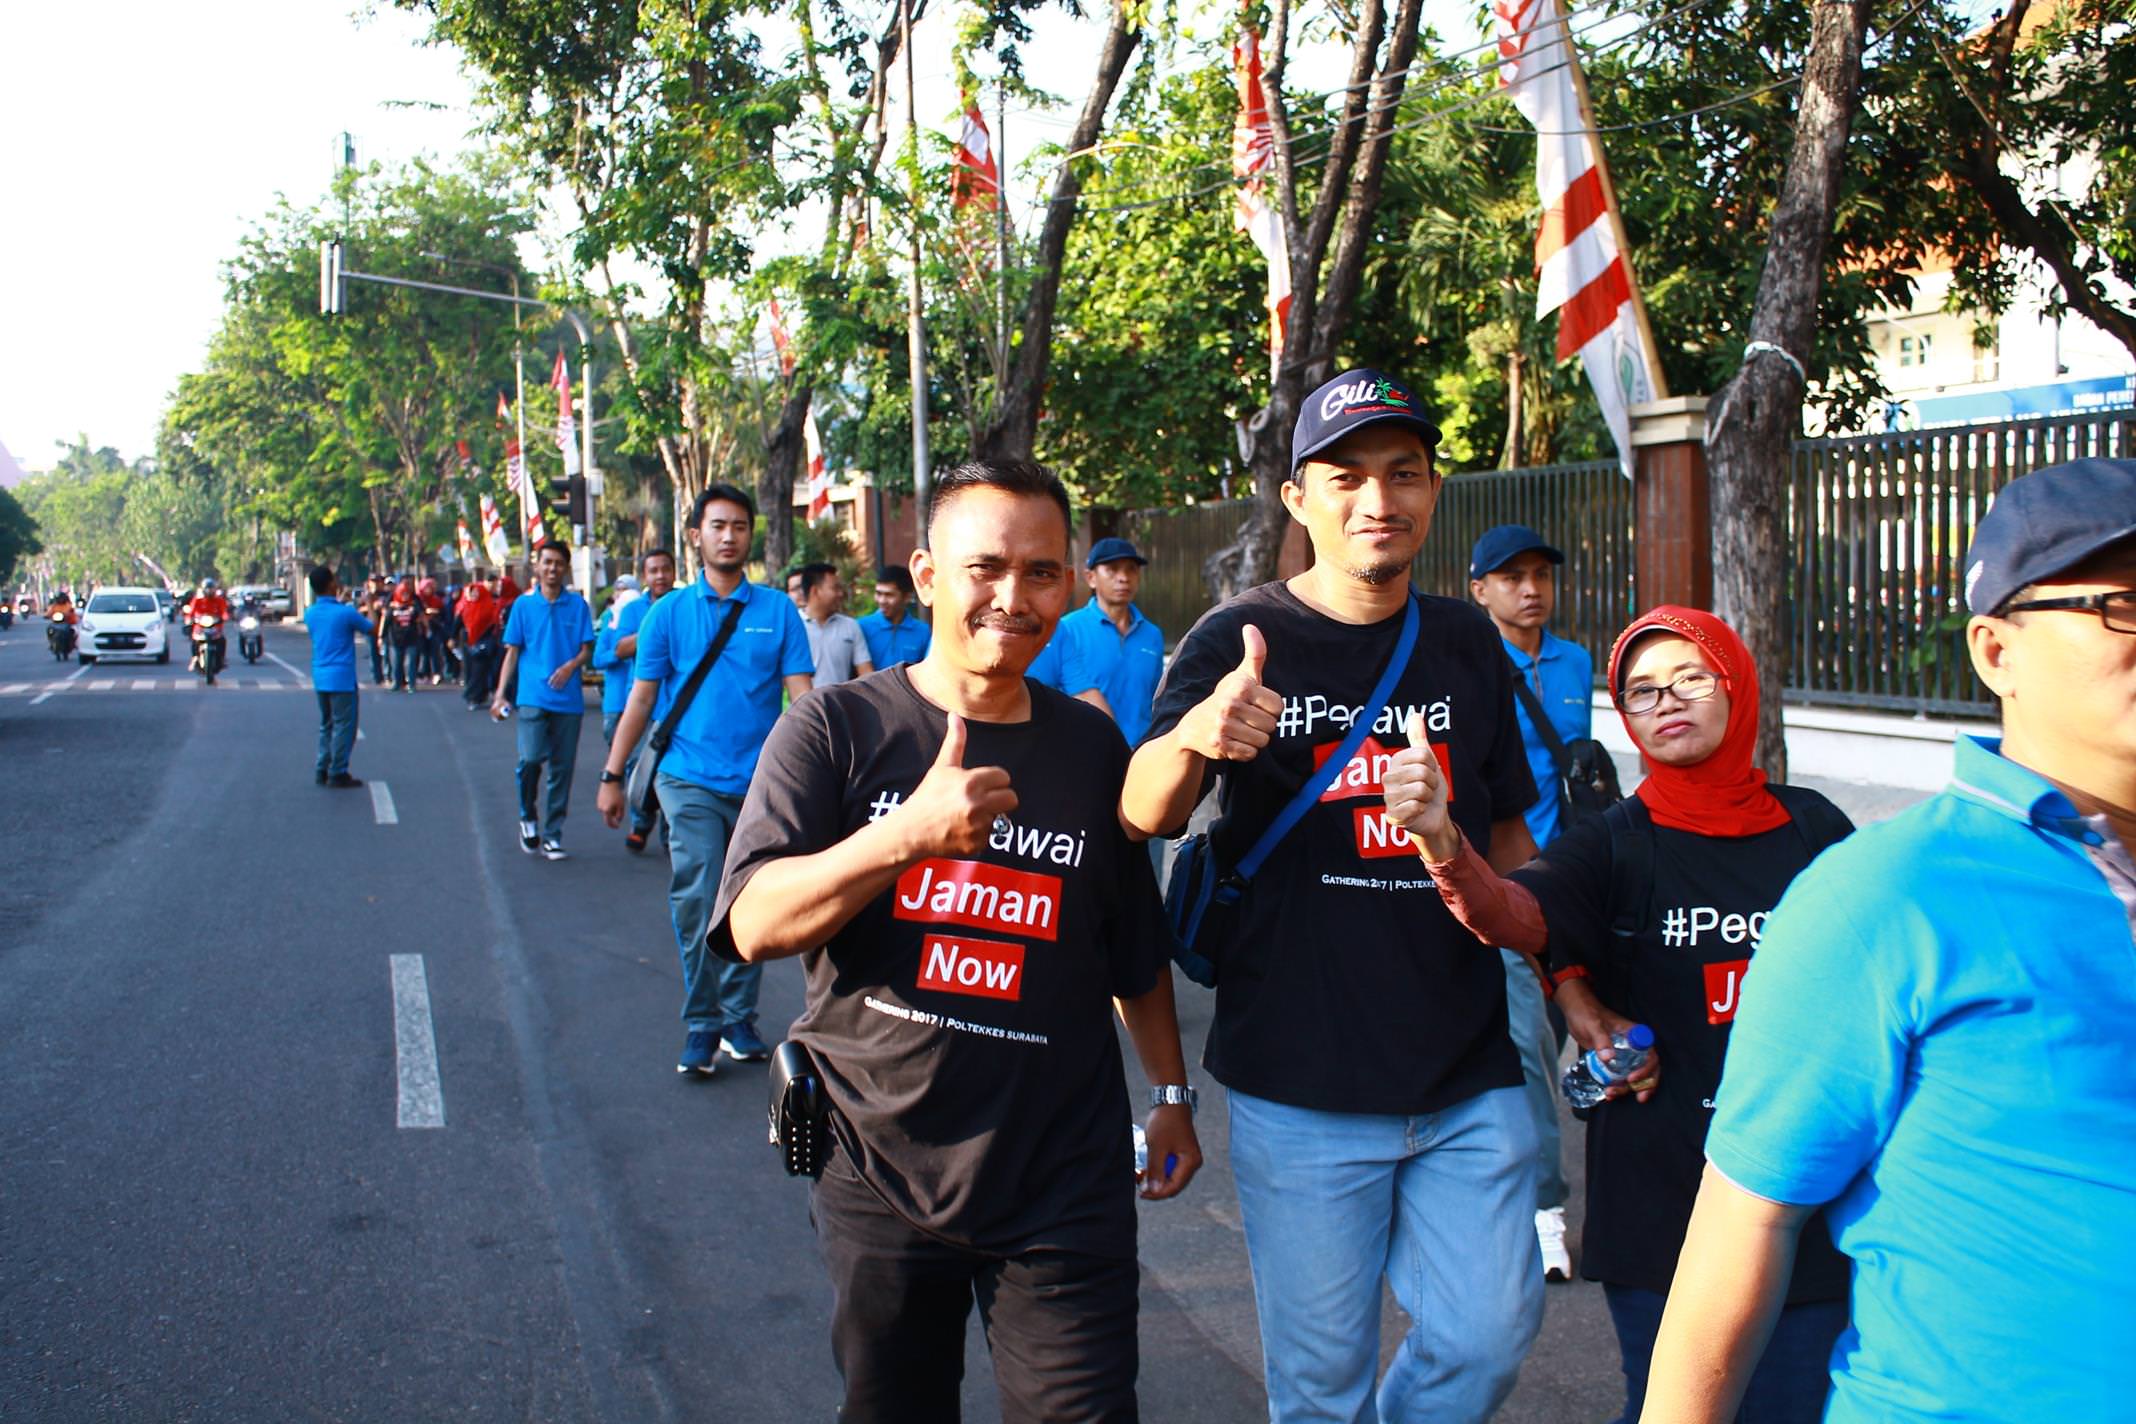 Indonesians Celebrate Independence Day